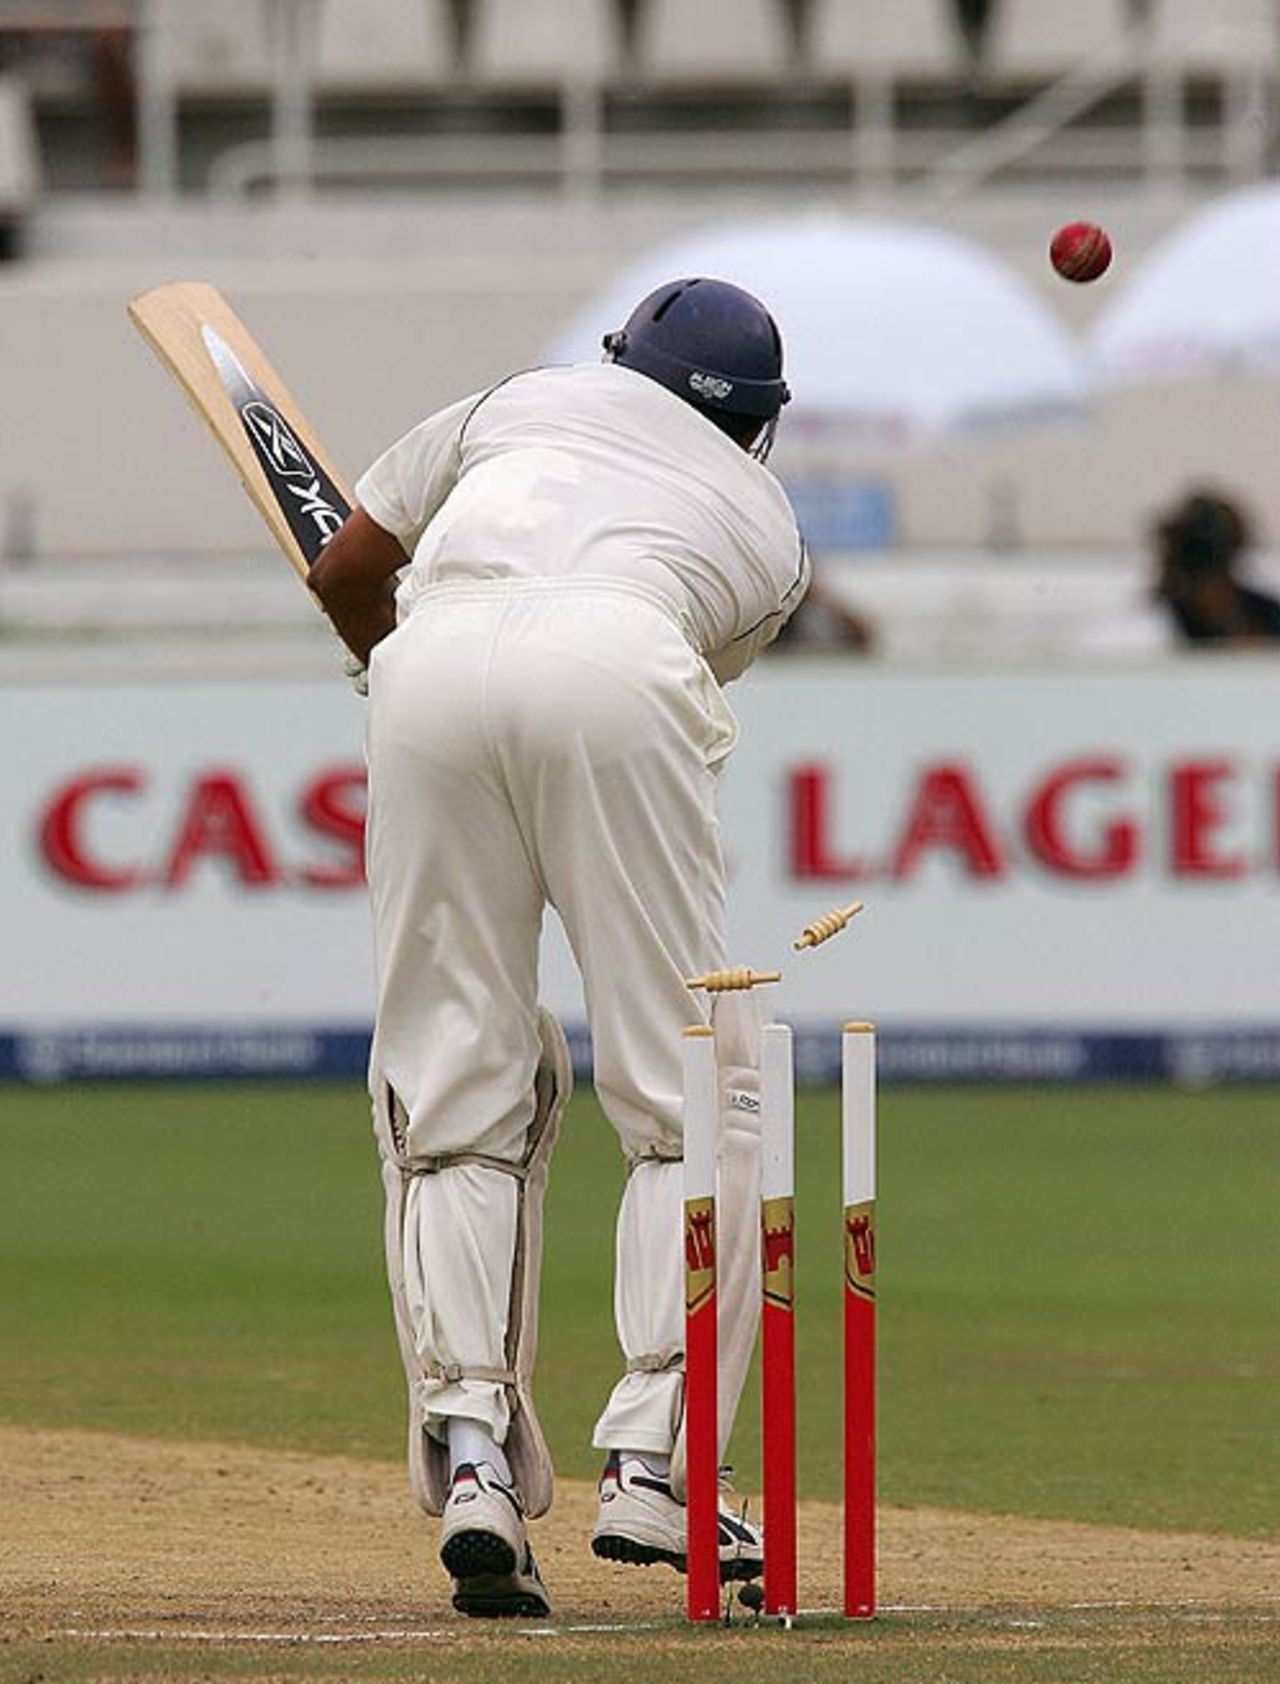 VVS Laxman is castled by Andre Nel, South Africa v India, 2nd Test, Durban, 4th day, December 29, 2006